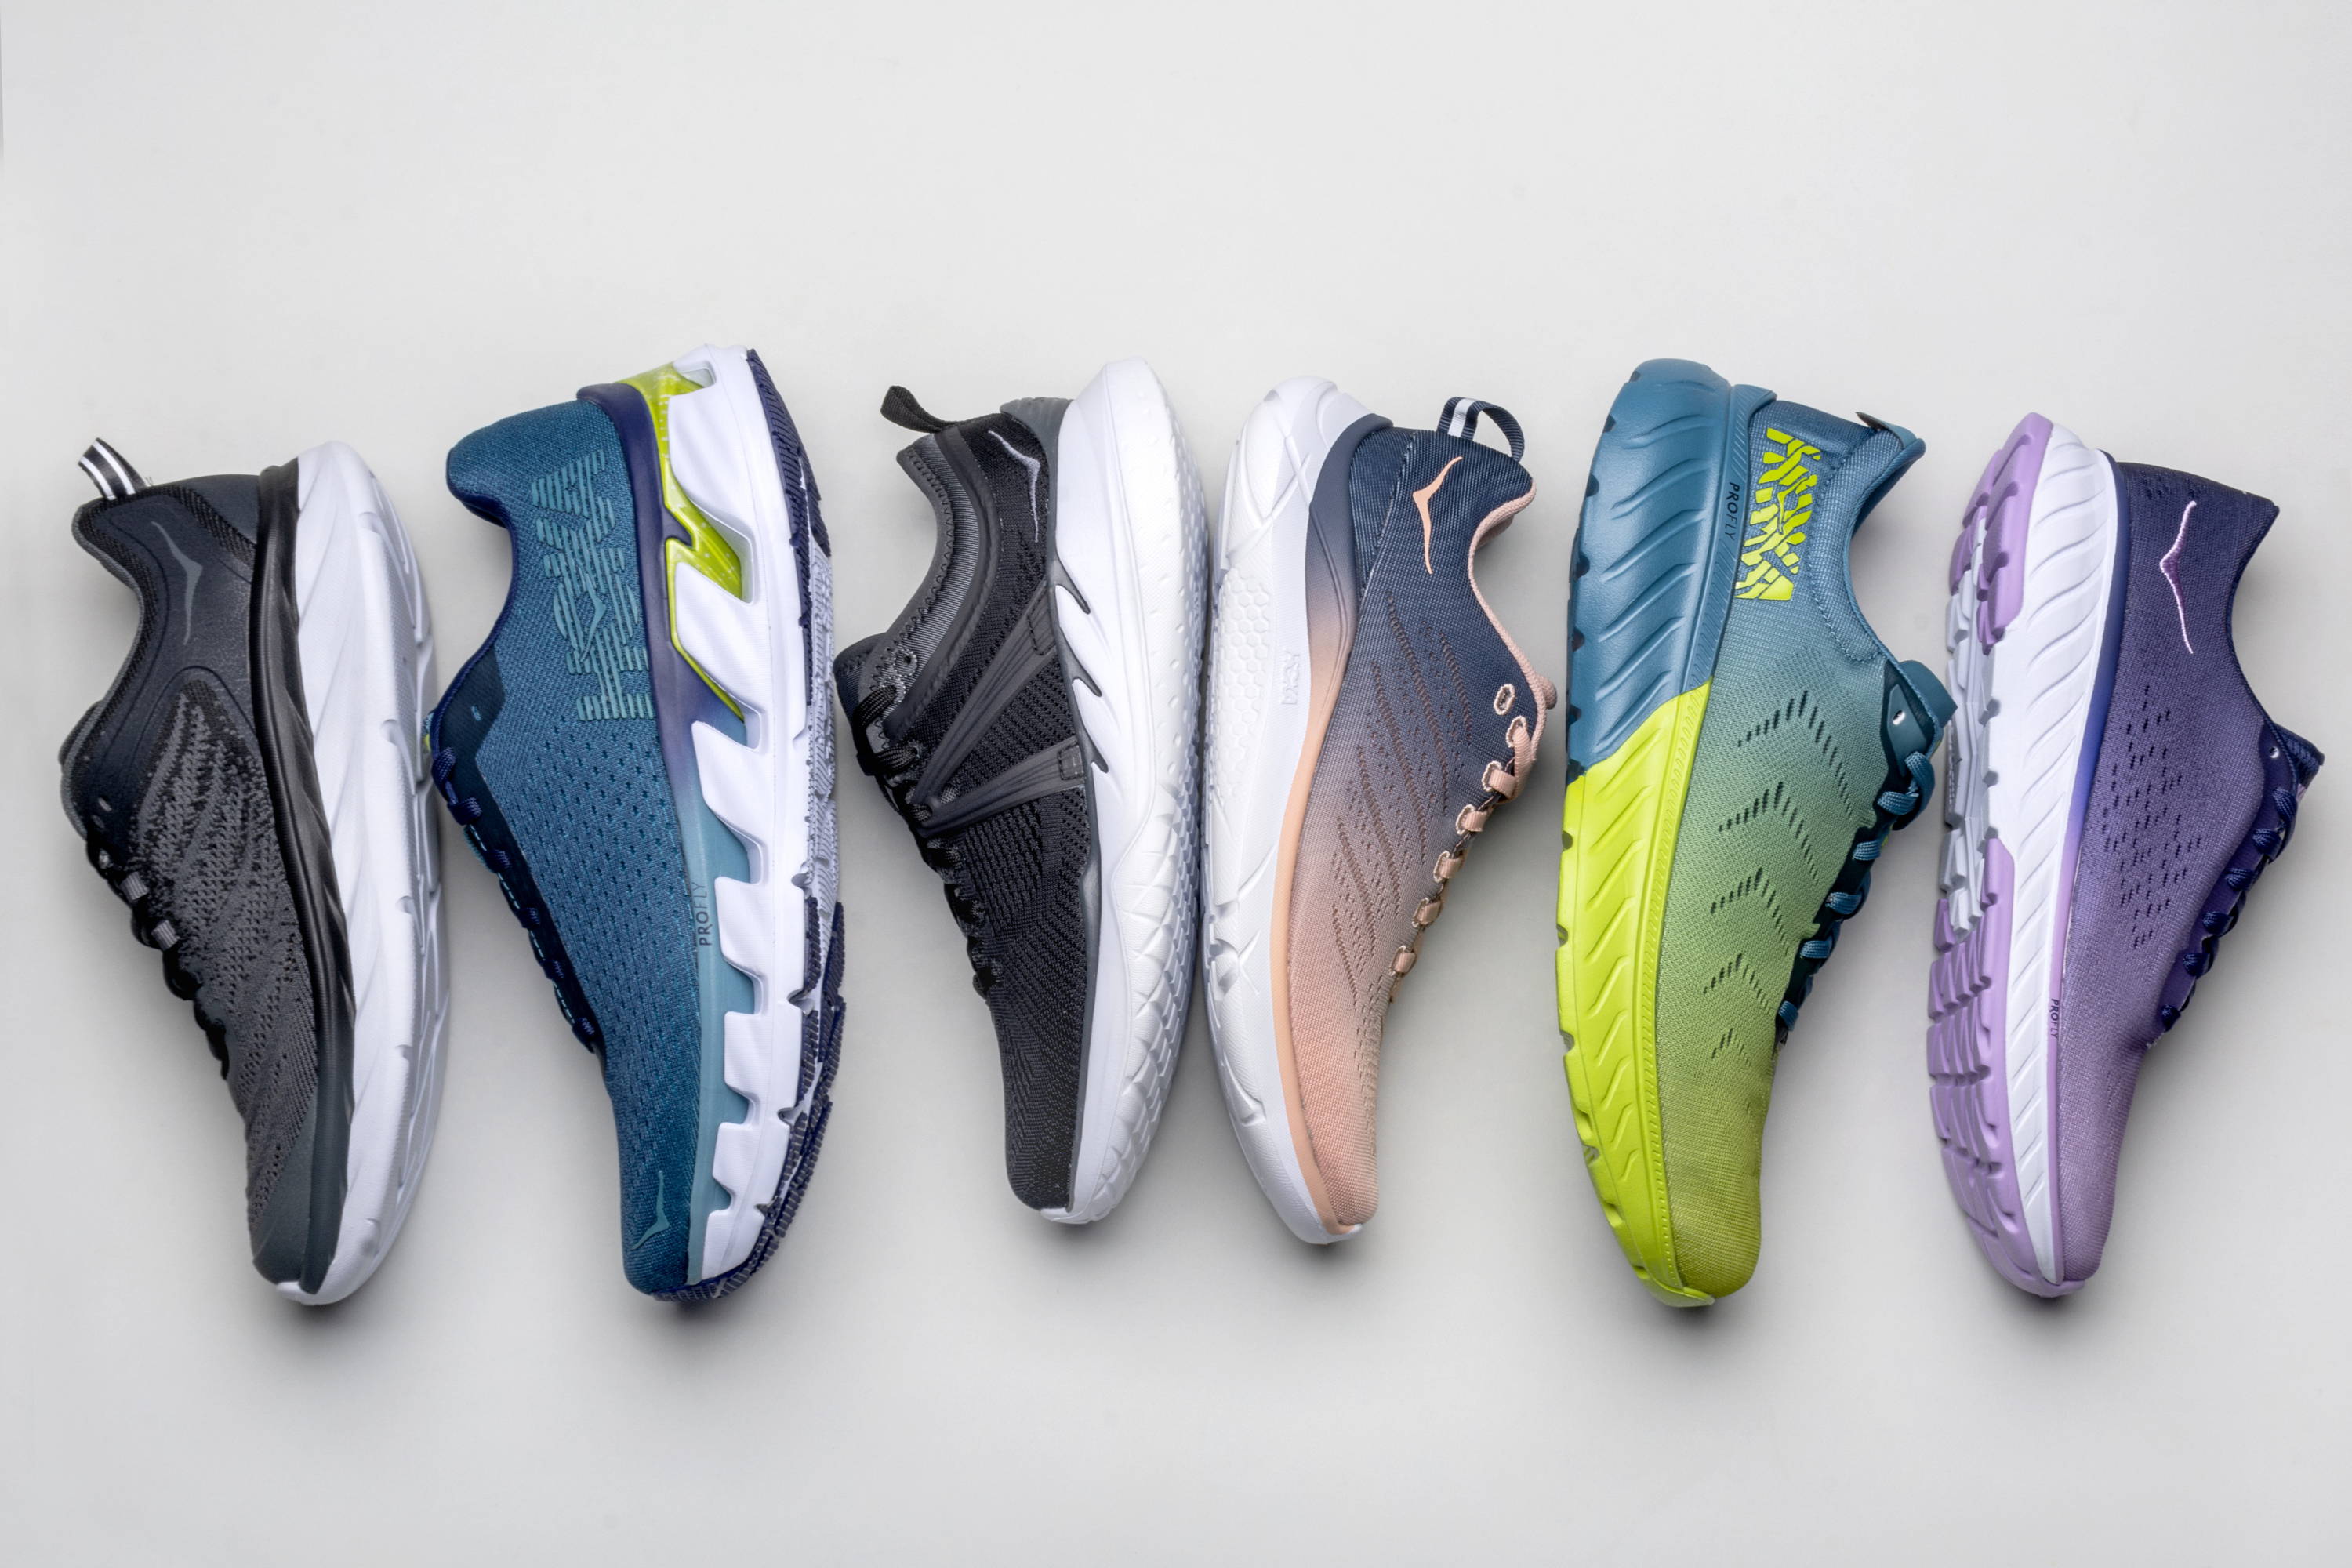 Soar Beyond Limits with Running Shoes from the 2019 Hoka One One Fly Collection